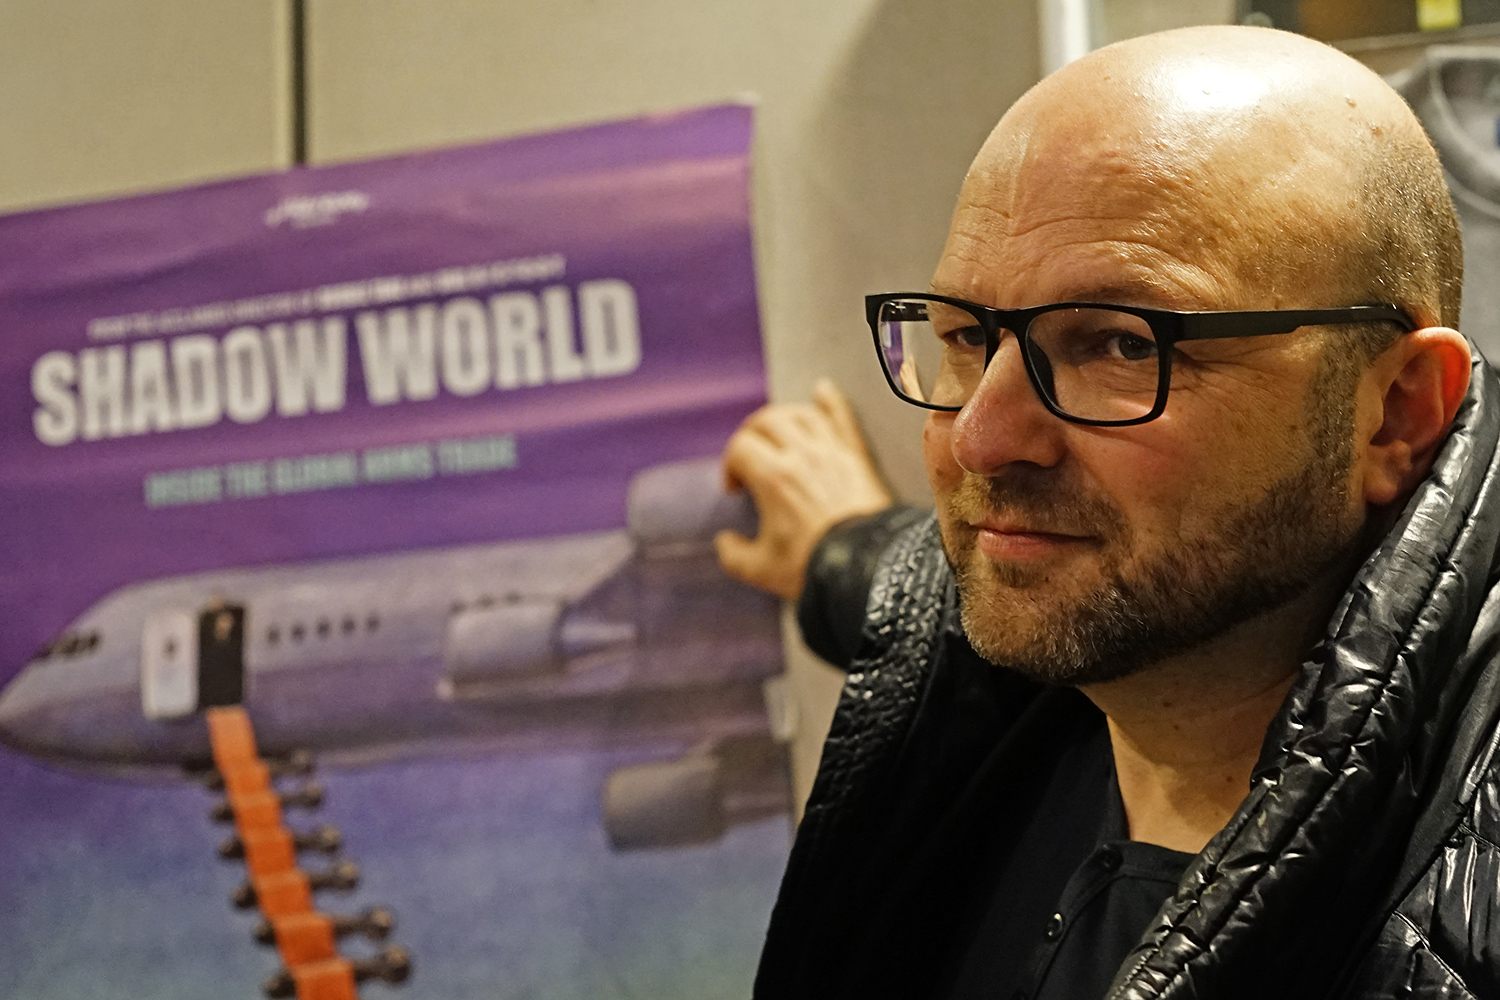 South African economist, arms industry espert, writer and former politician at the presentation of the documentary 'Shadow World: Inside the Global Arms Trade' in Copenhagen, Denmark - November 2016